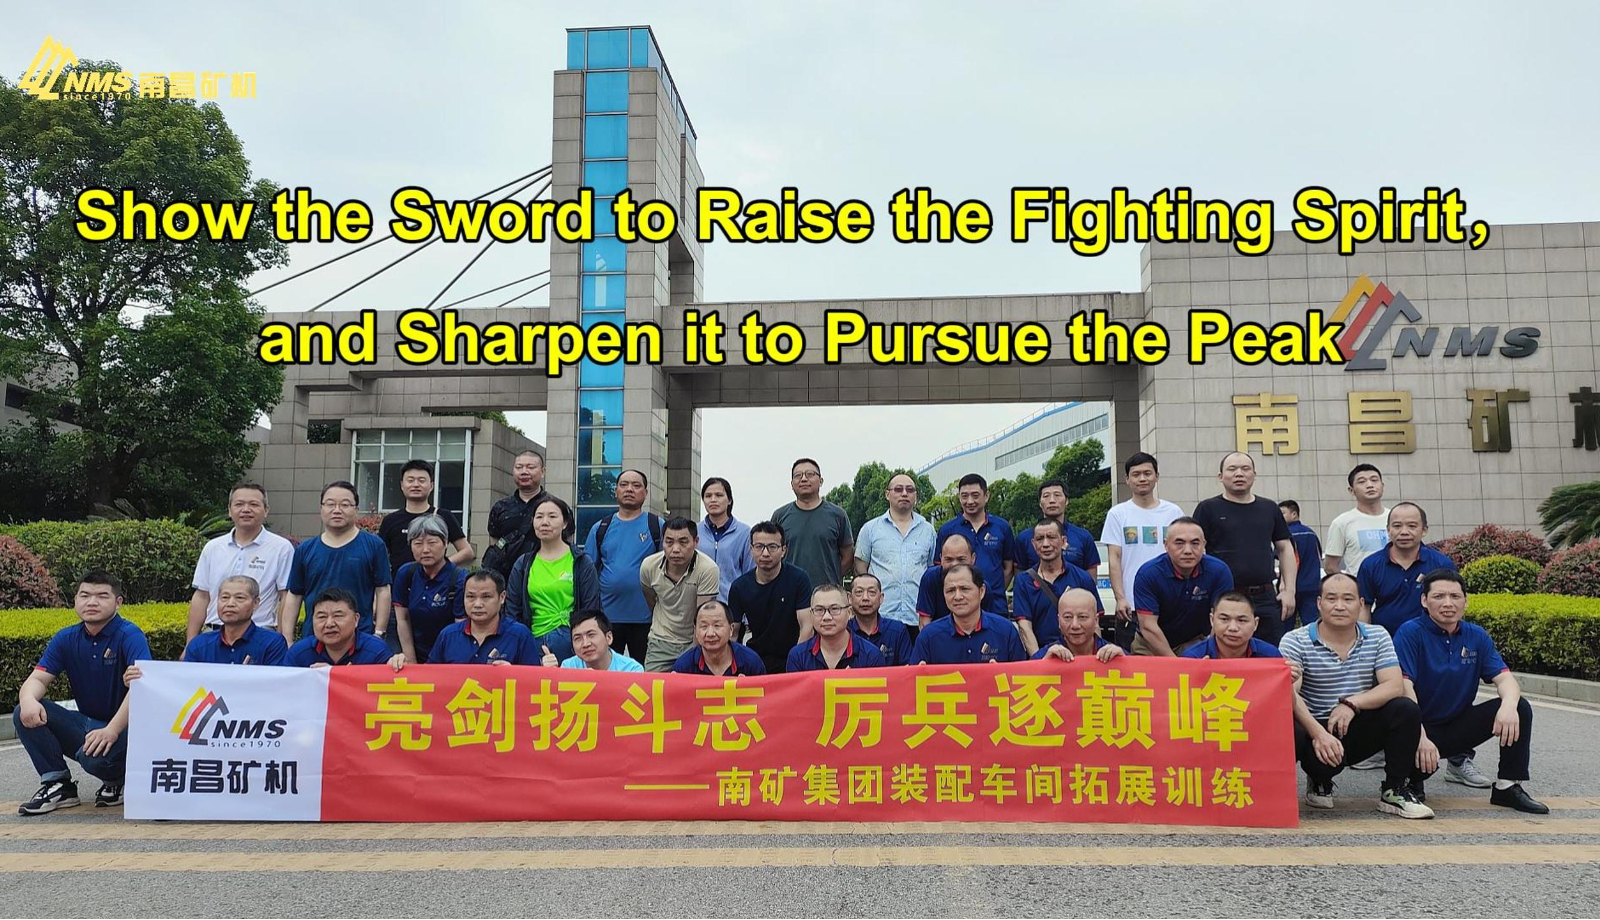 Show the Sword to Raise the Fighting Spirit and Sharpen it to Pursue the Peak